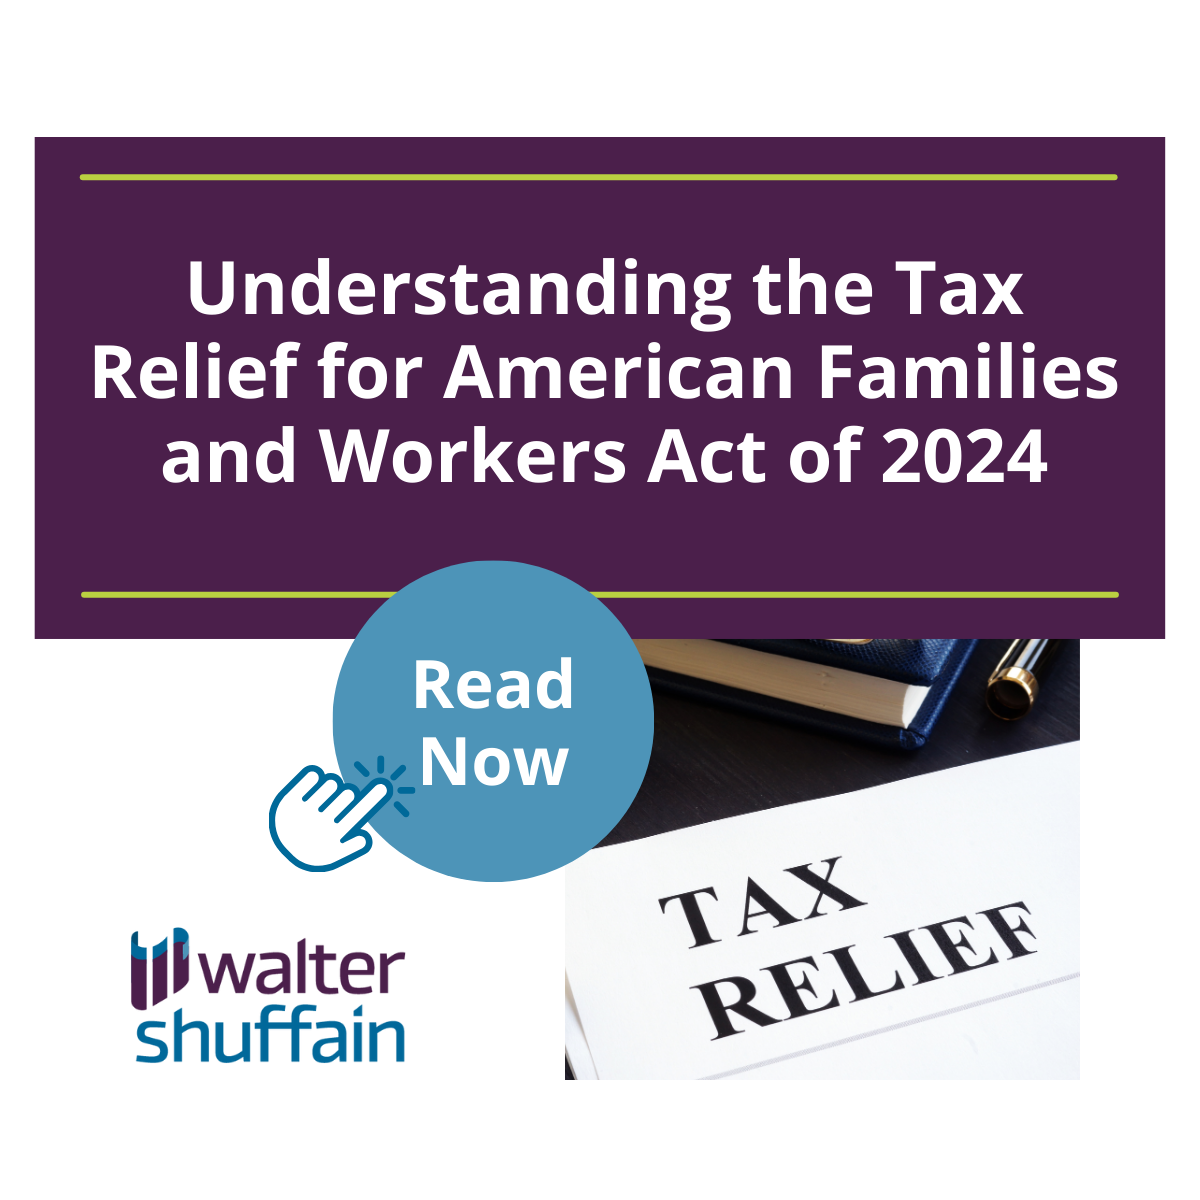 Understanding the Tax Relief for American Families and Workers Act of